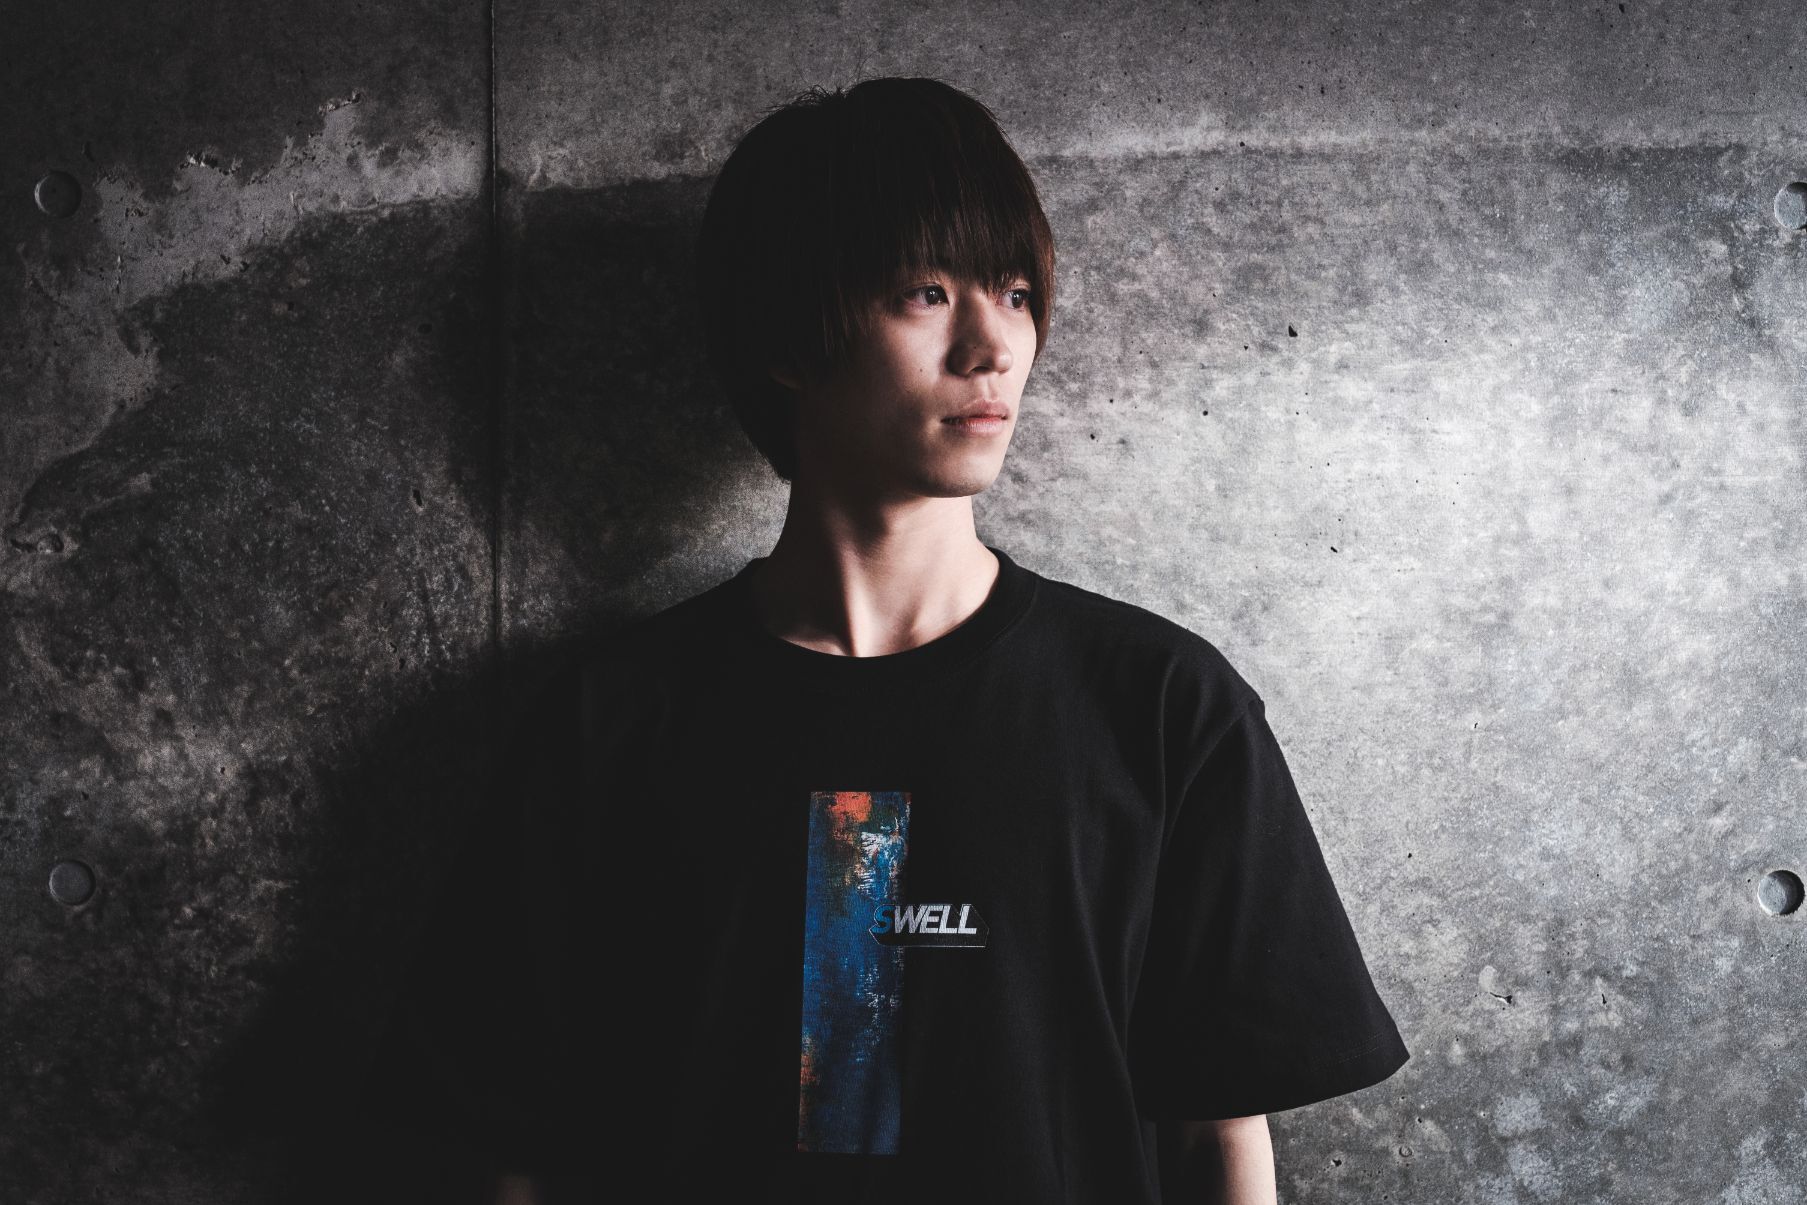 SWELL
NEW ITEM ARRIVAL 